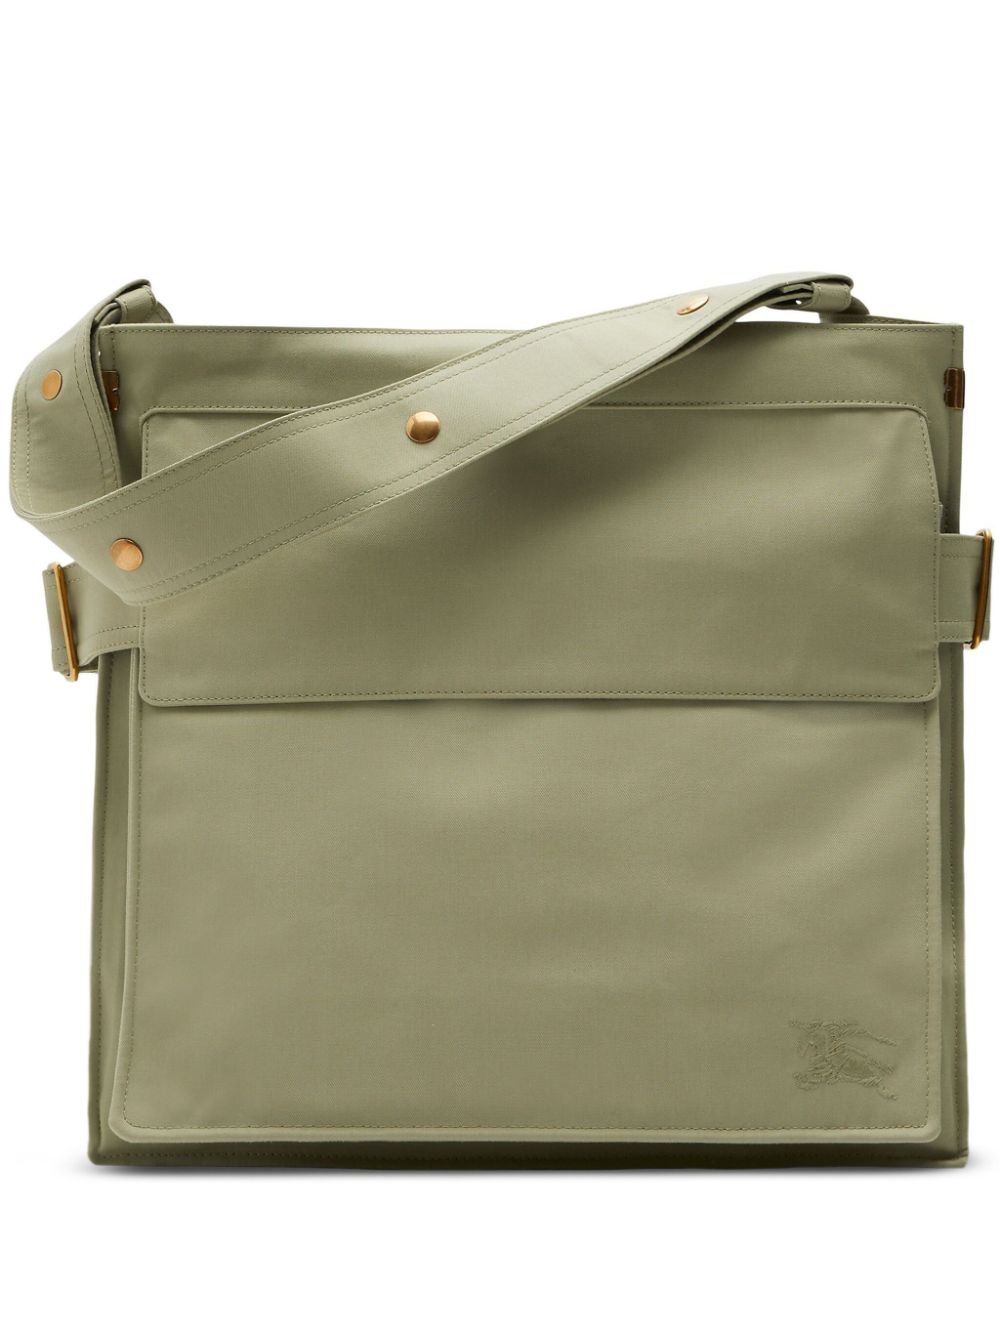 Burberry large Trench tote bag - Green von Burberry